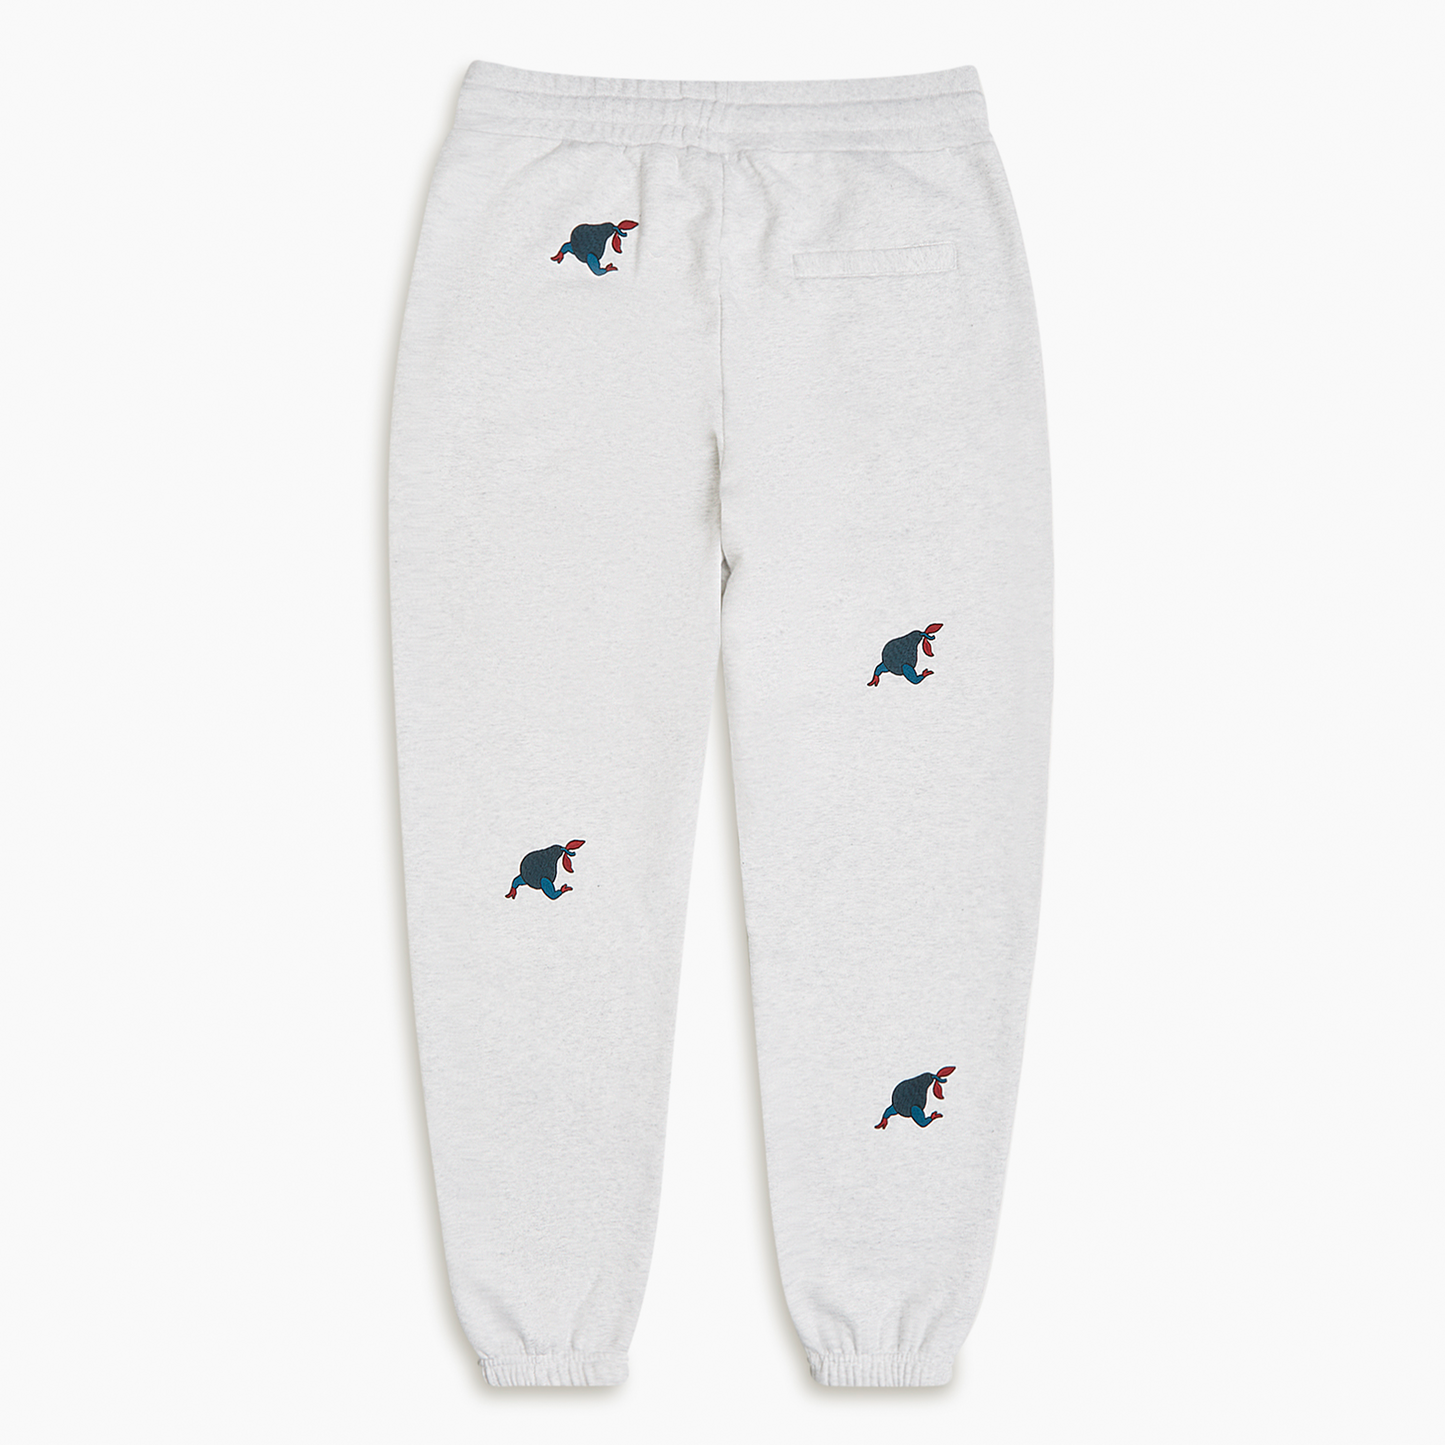 By Parra Running Pear Sweatpants